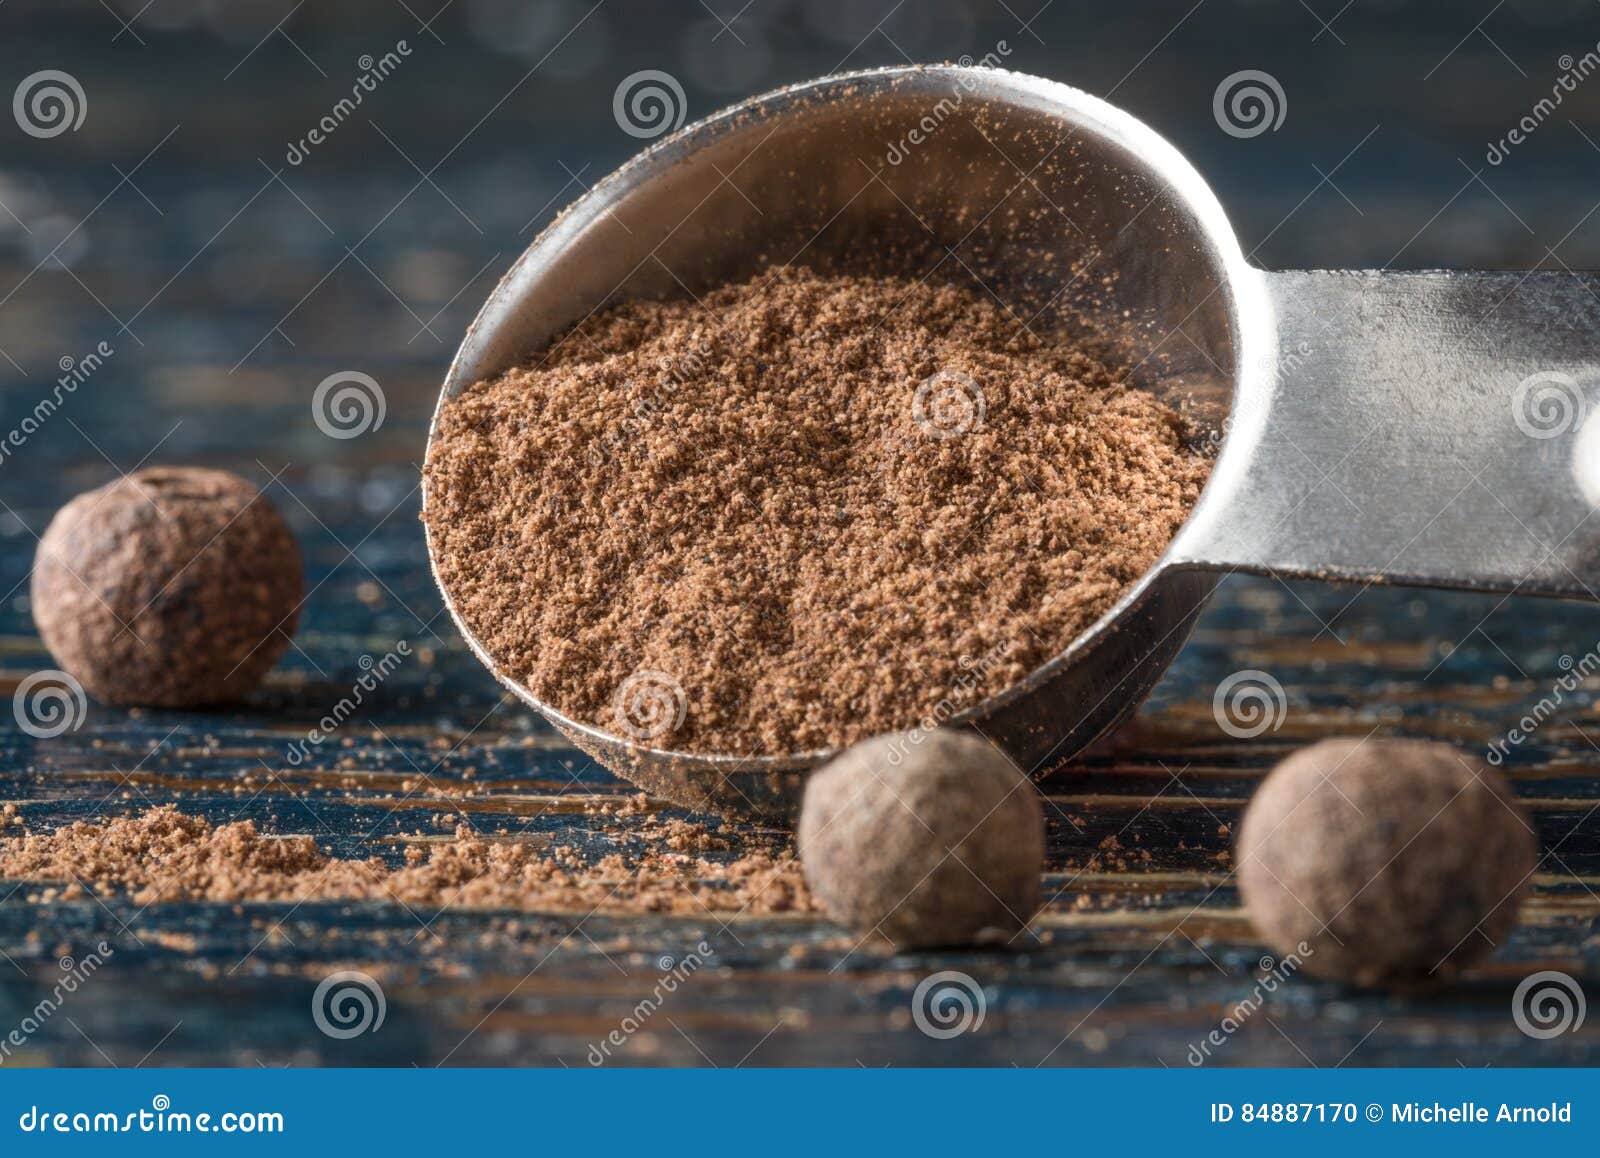 ground allspice spilled from a teaspoon